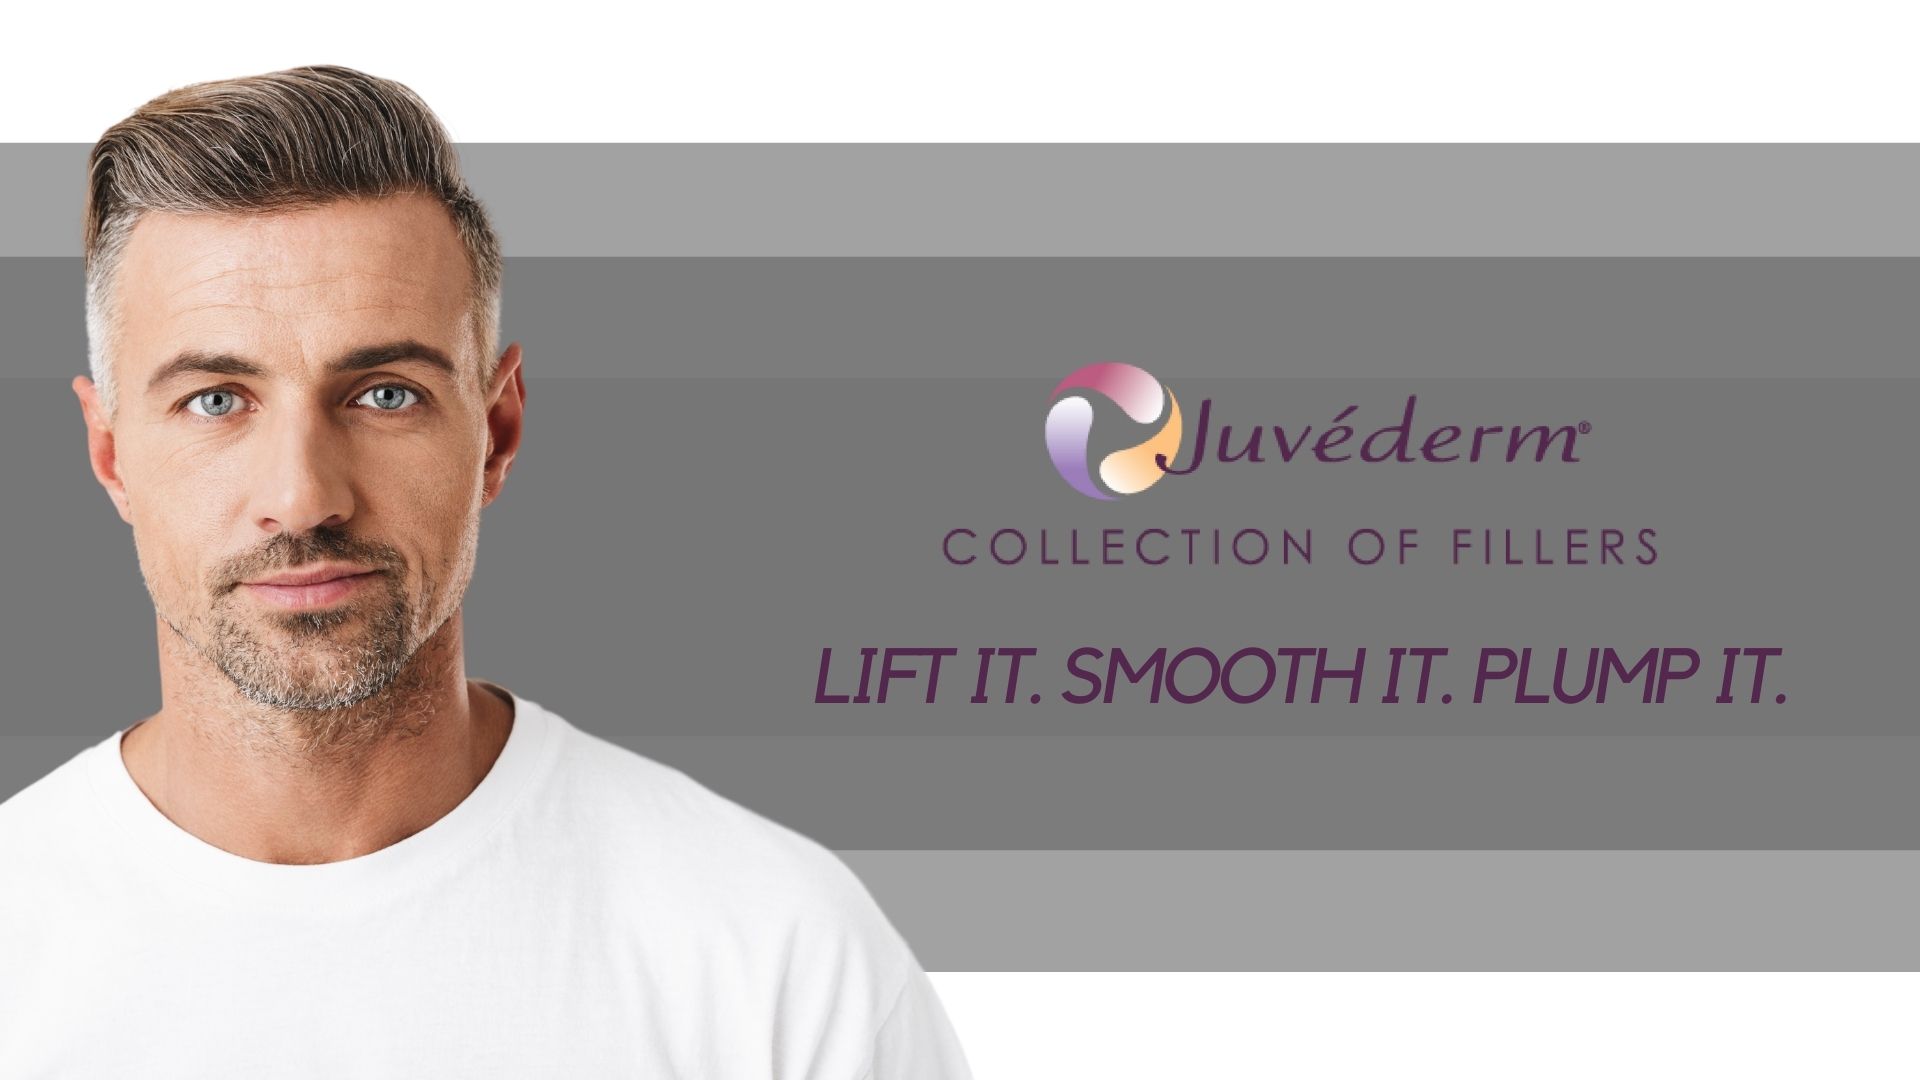 Juvederm treatment skin perfect brothers